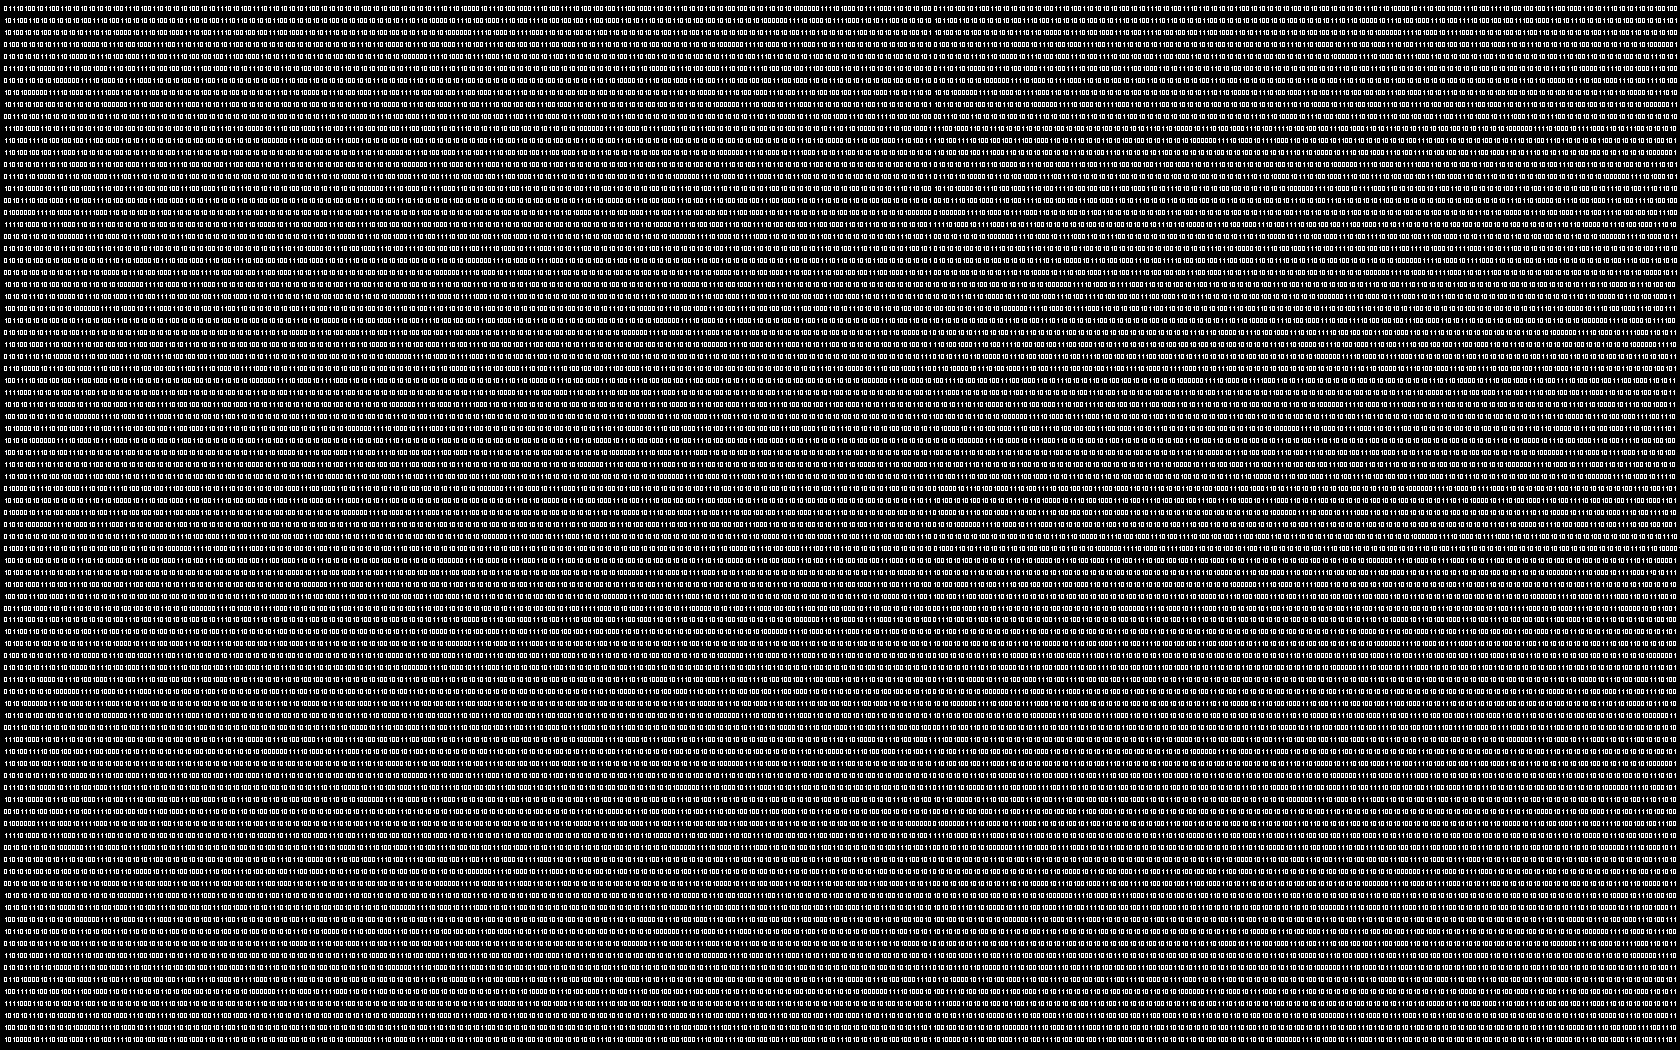 Binary Code Wallpapers Top Free Binary Code Backgrounds Wallpaperaccess We hope you enjoy our growing collection of hd images to use as a background or home screen for your smartphone or computer. binary code wallpapers top free